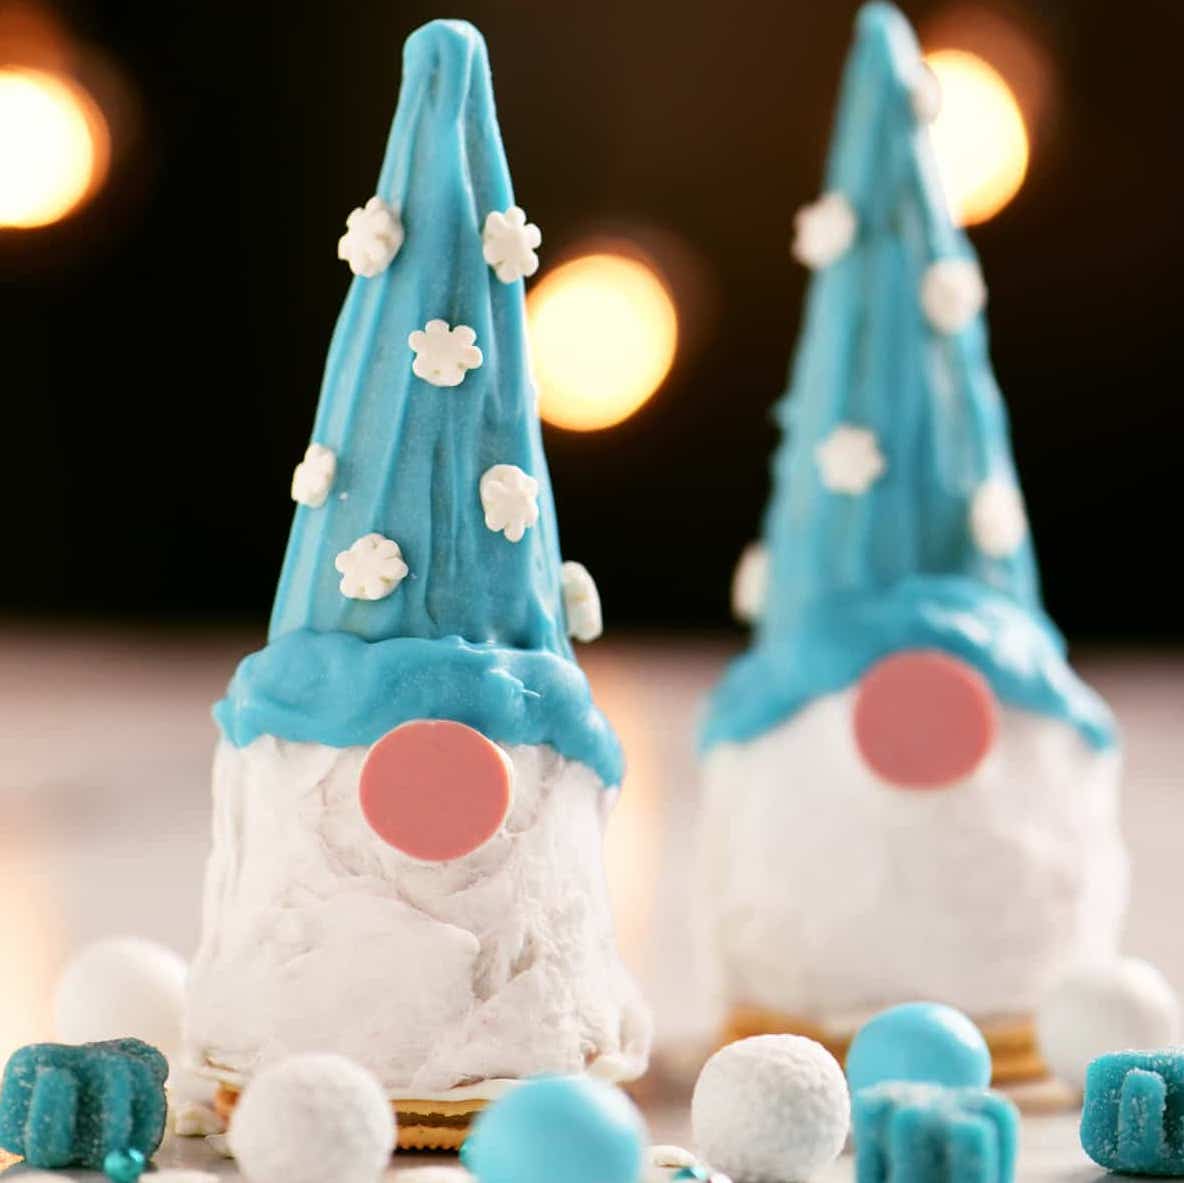 edible cones decorated as gnomes.